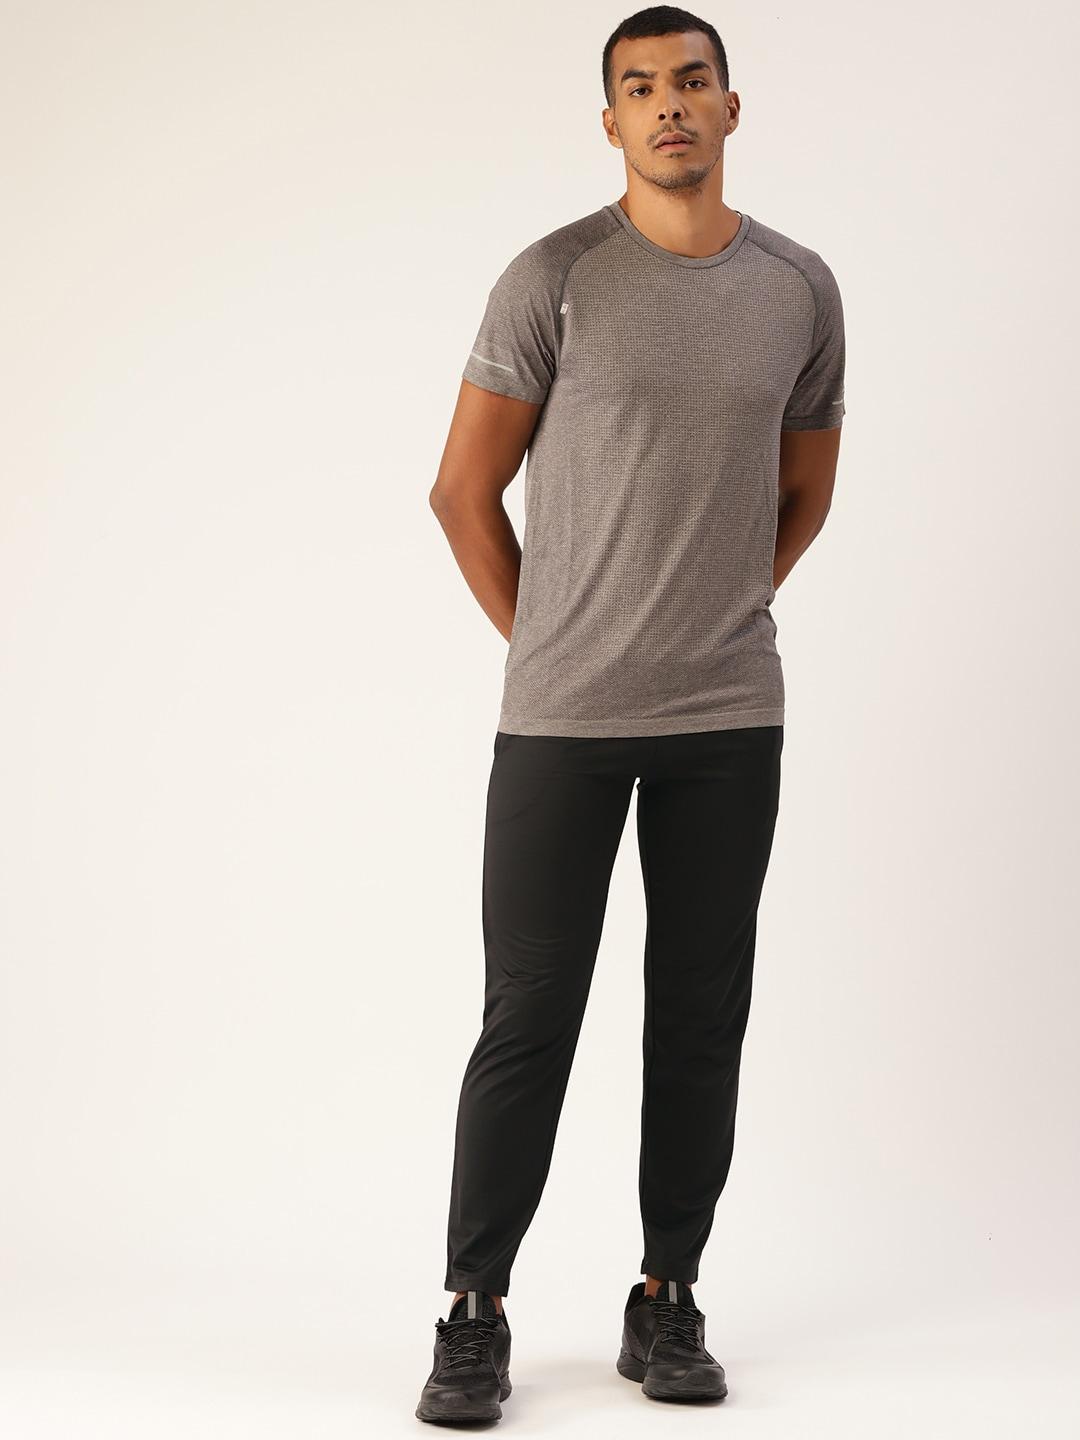 armisto-men-black-solid-dry-fit-all-weather-training-track-pants